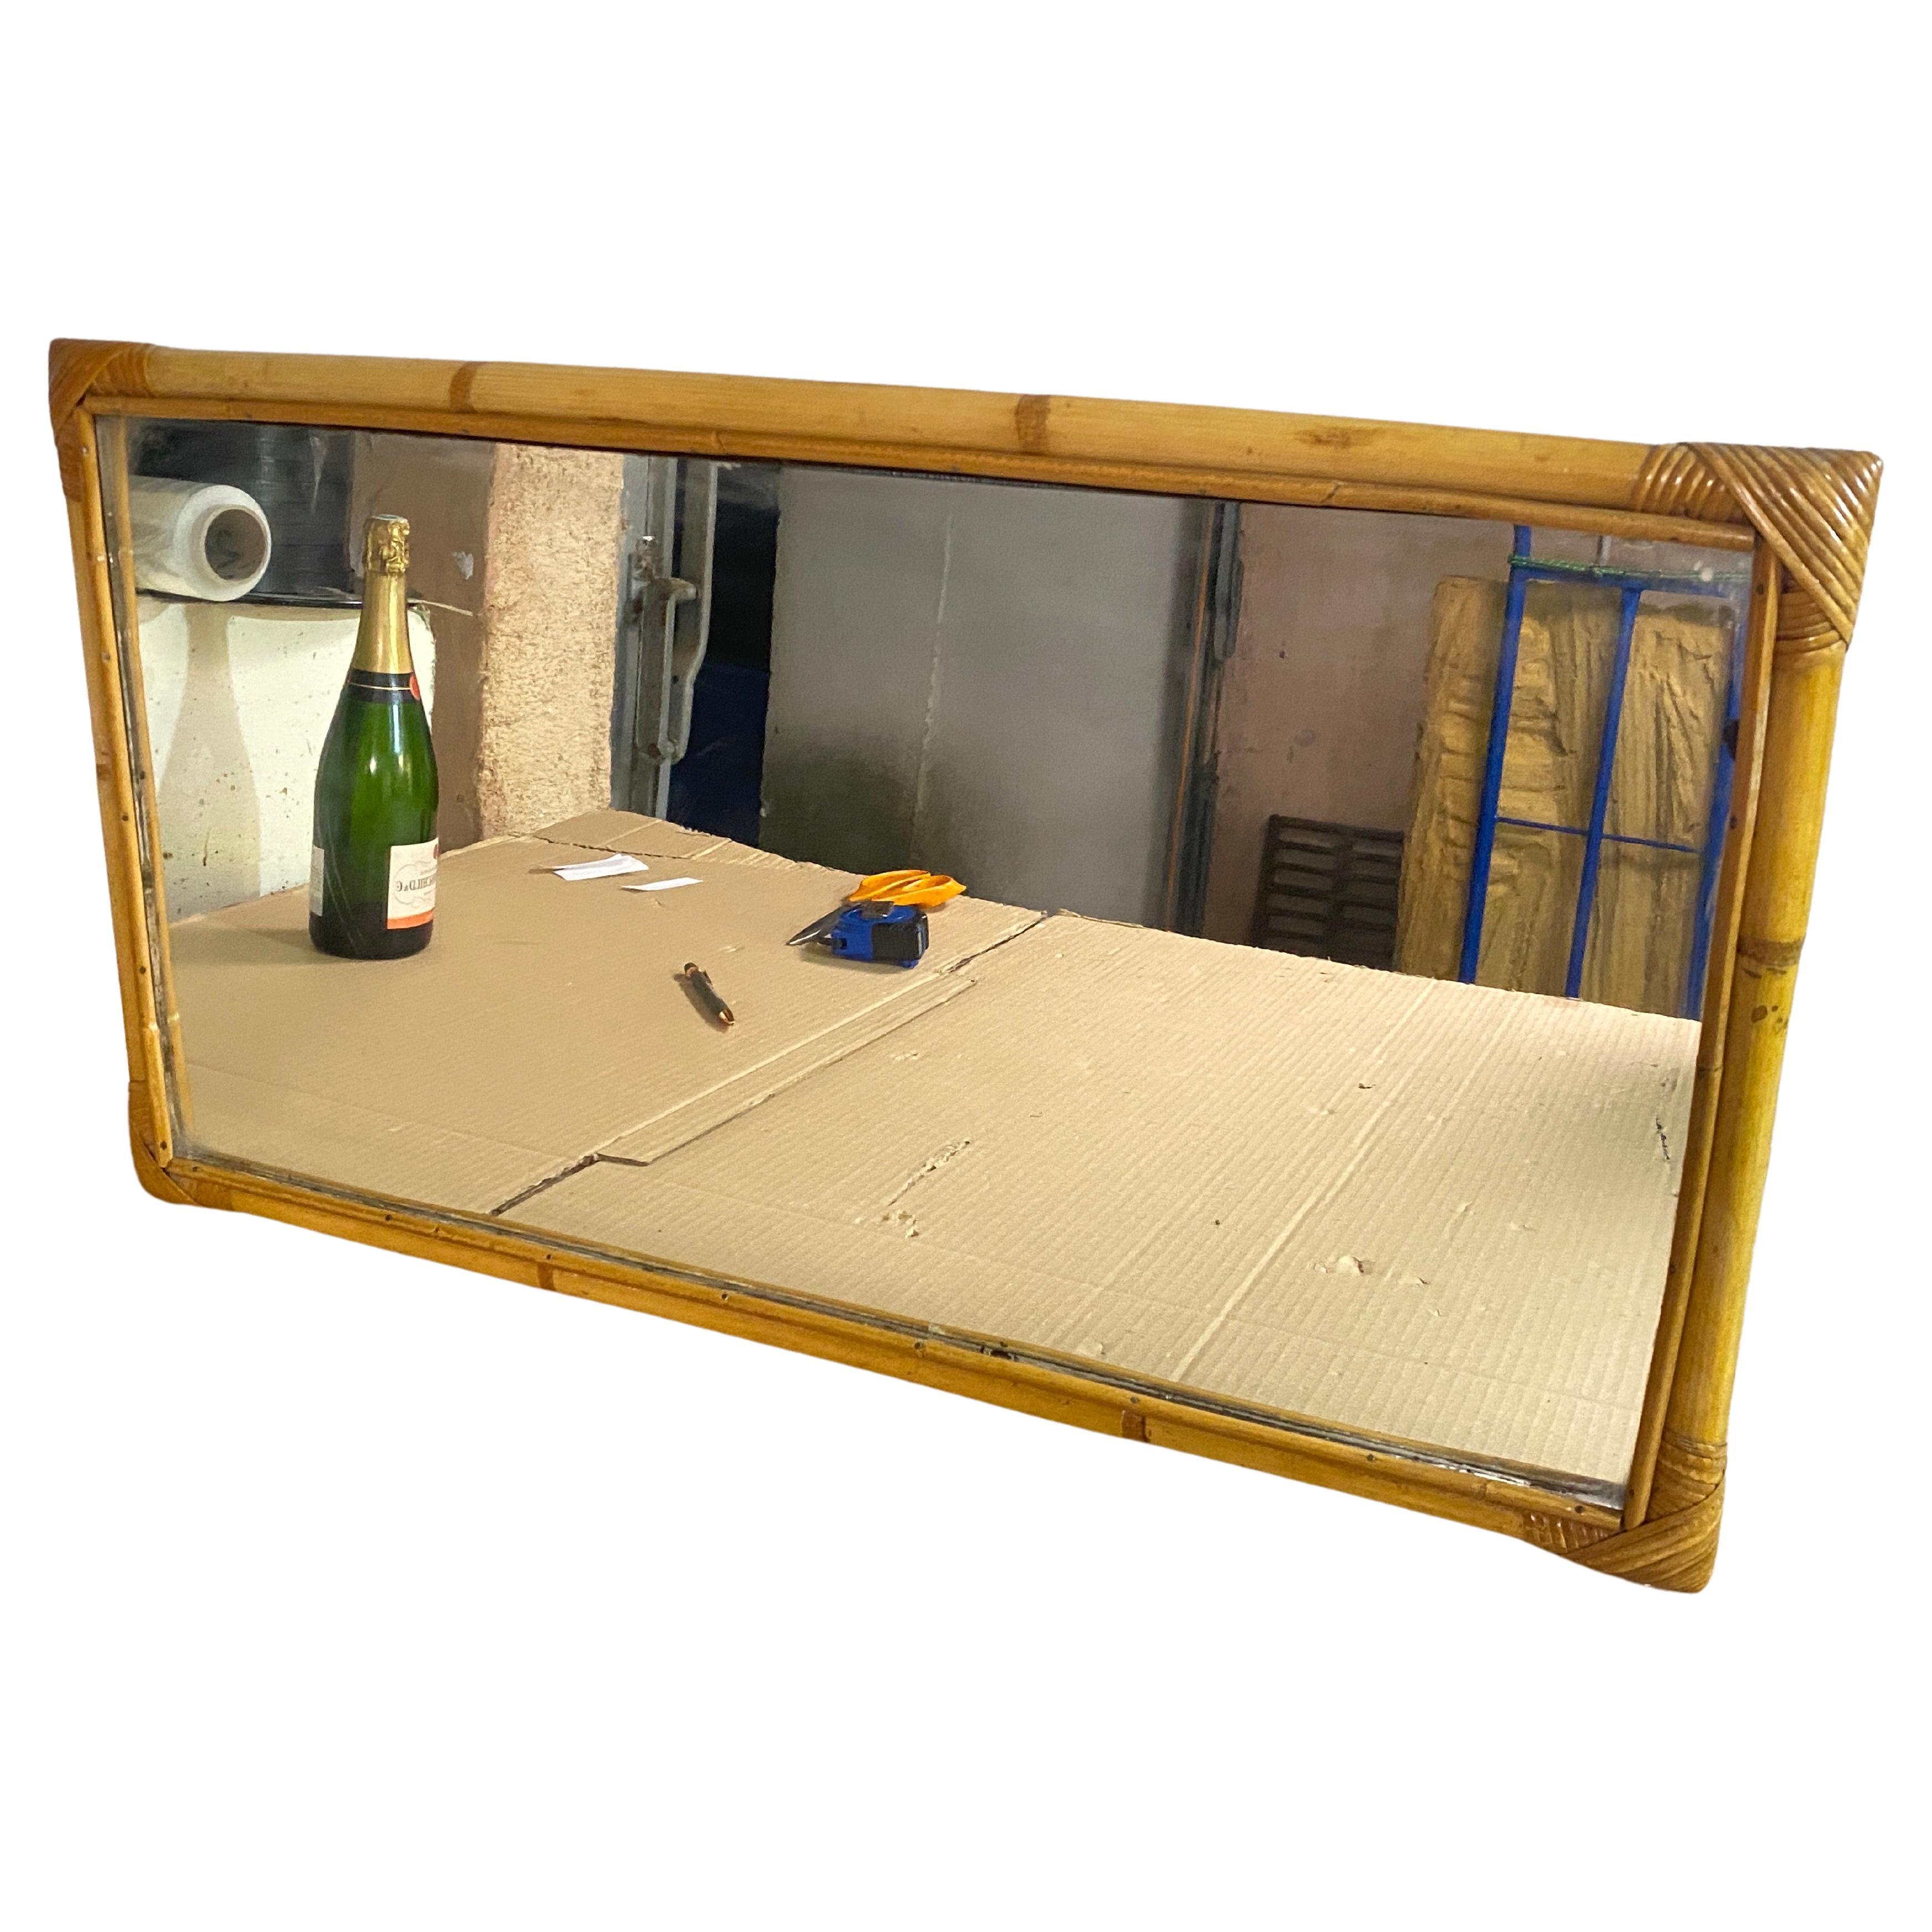 Beautiful rectangular wall mirror in bamboo and rattan. 

The corners are lashed together and protected with rattan strands. 

Incredibly stylish, it can add a real focal point to any room with considerable decorative effect. 

Made in Italy in the